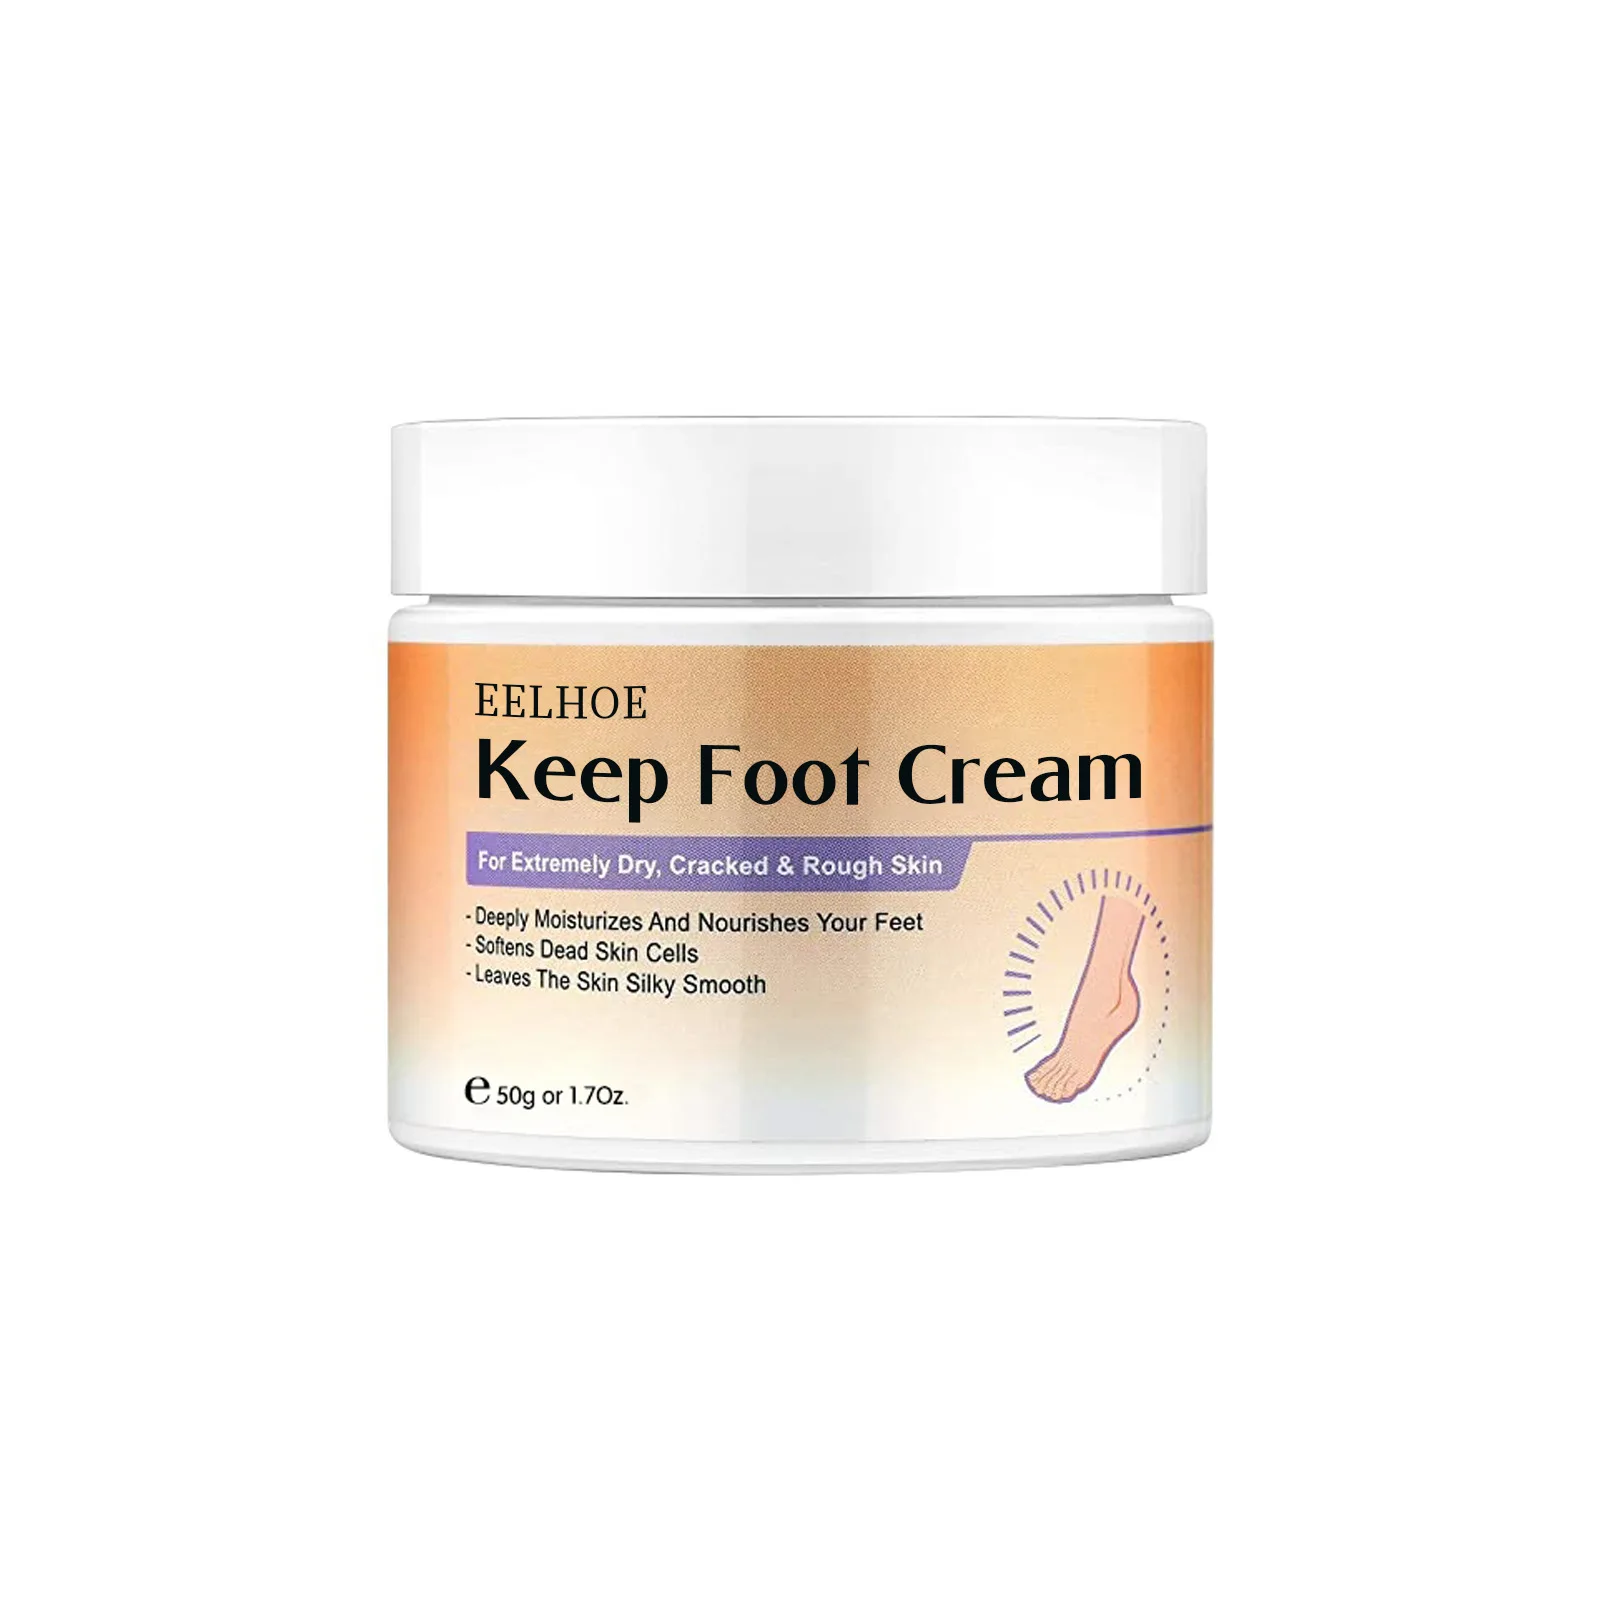 Eelhoe Moisturizing And Repairing Dry Hands And Feet Peeling Rough And  Chapped Foot Cream For Cracked Heels - Buy Foot Cream,Foot Cream For  Cracked Heels,Repairing Dry Hands And Feet Product on 